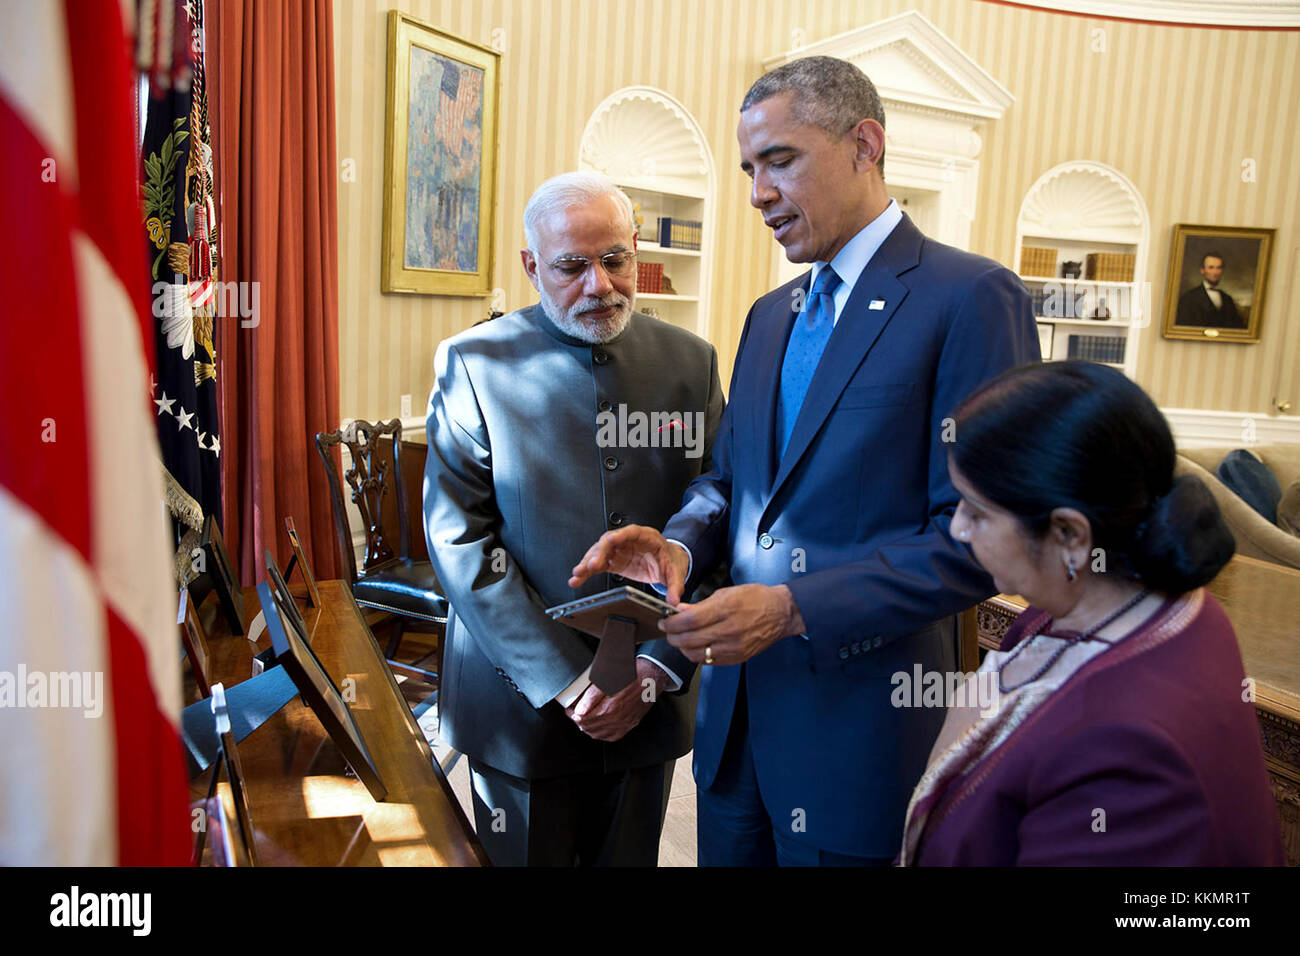 President Barack Obama discusses a photograph with Prime Minister Narendra Modi of India and Minister of External Affairs Sushma Swaraj following a bilateral meeting in the Oval Office, Sept. 30, 2014. Stock Photo